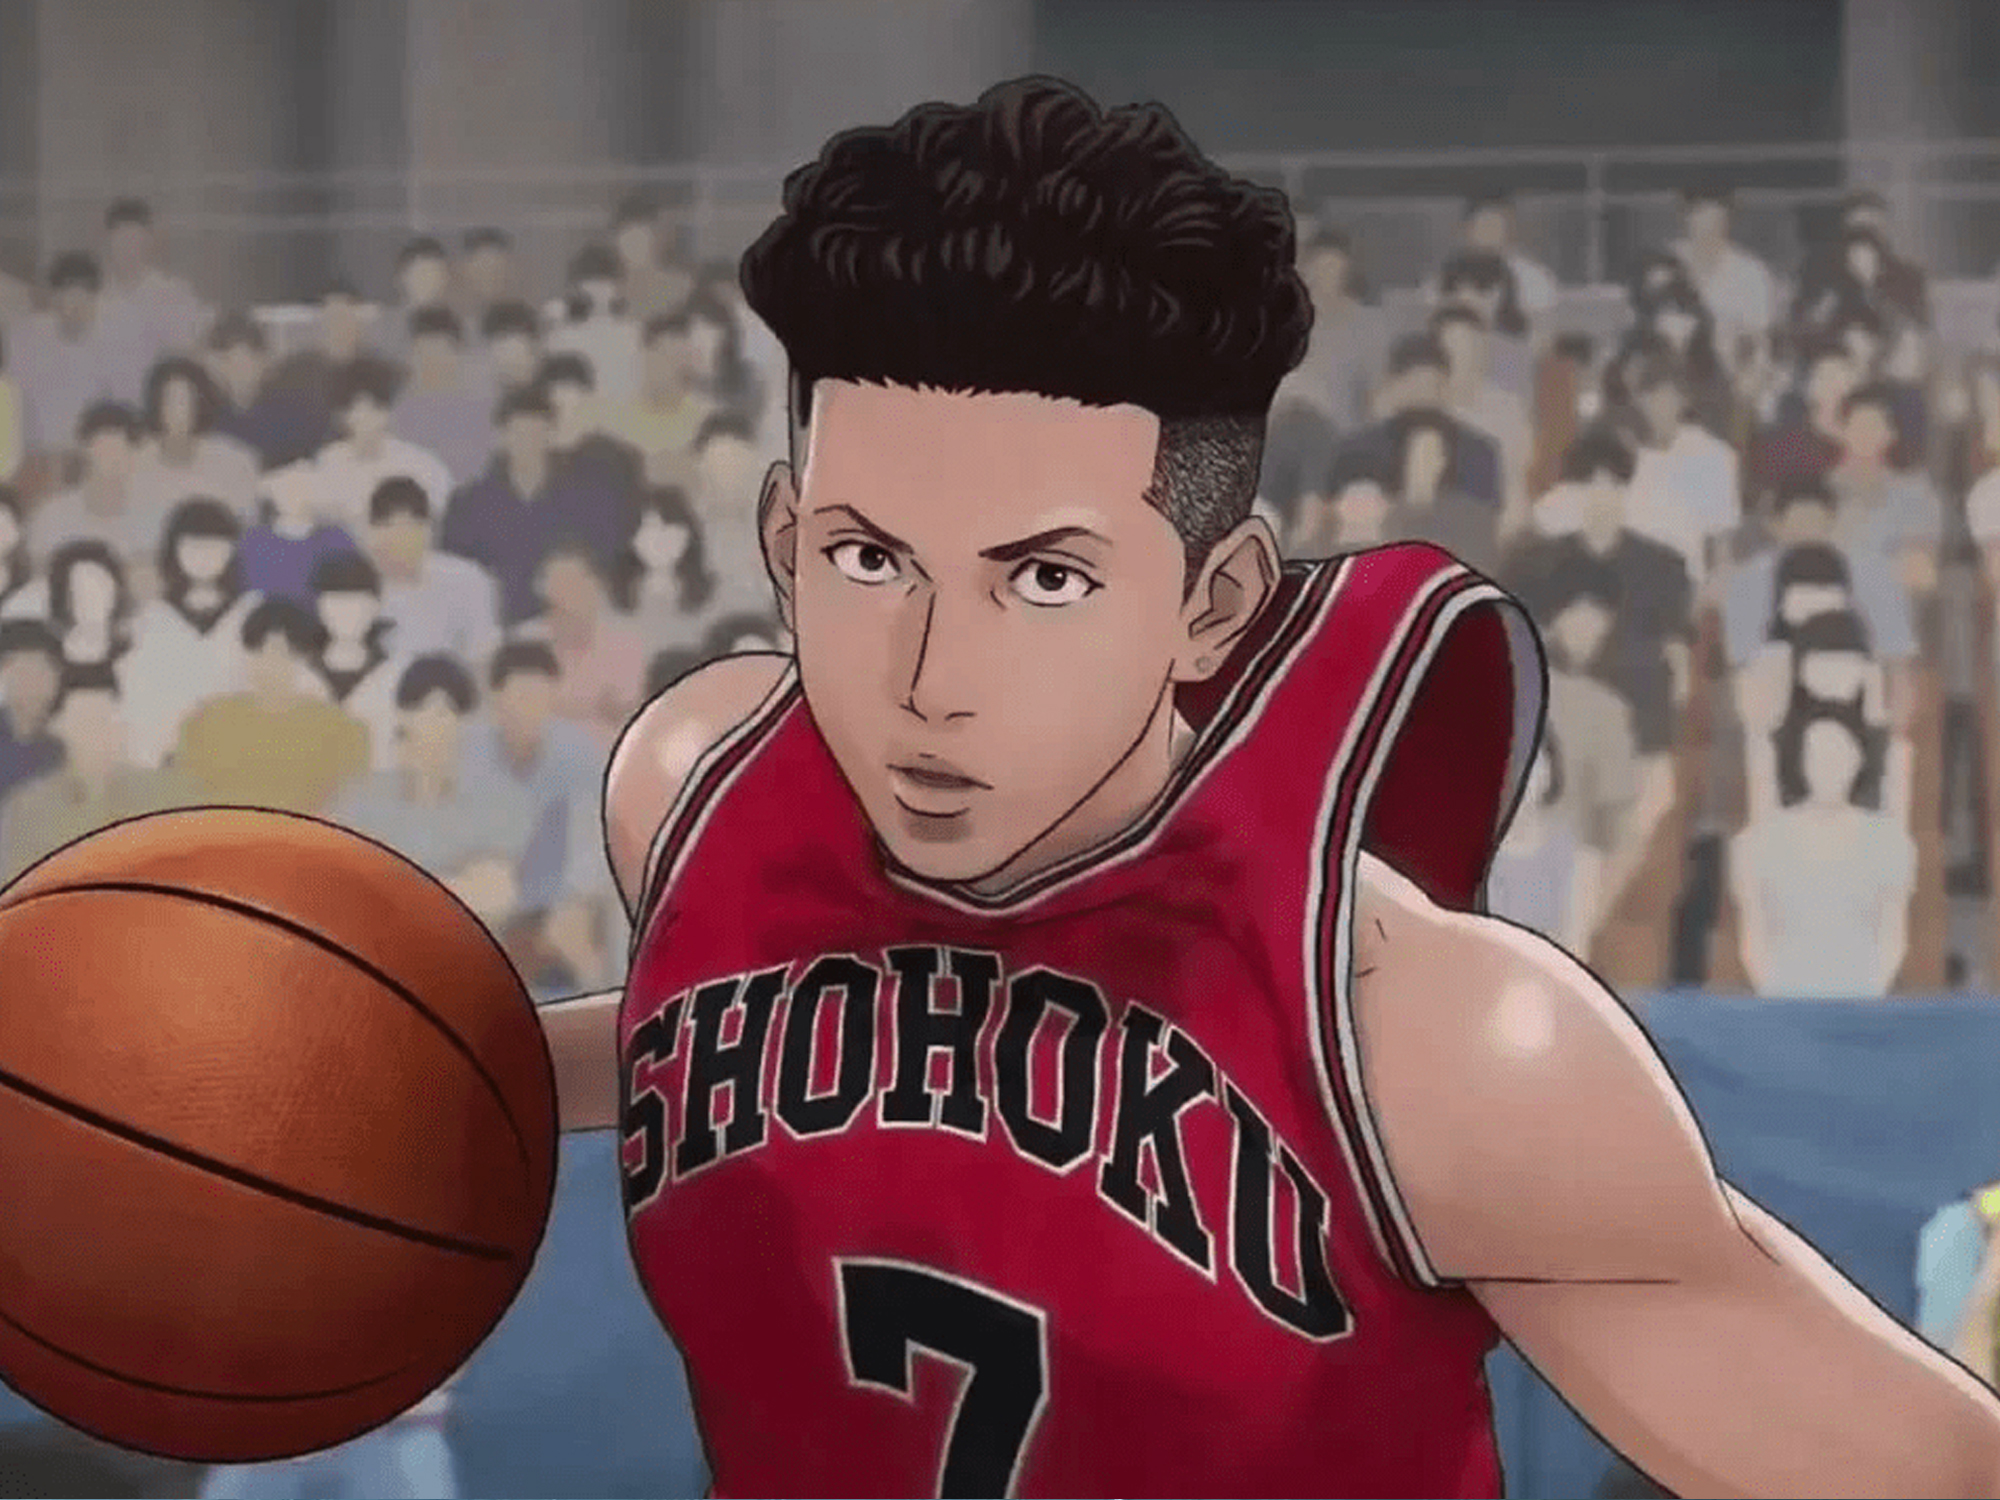 The First Slam Dunk review – thrillingly choreographed basketball